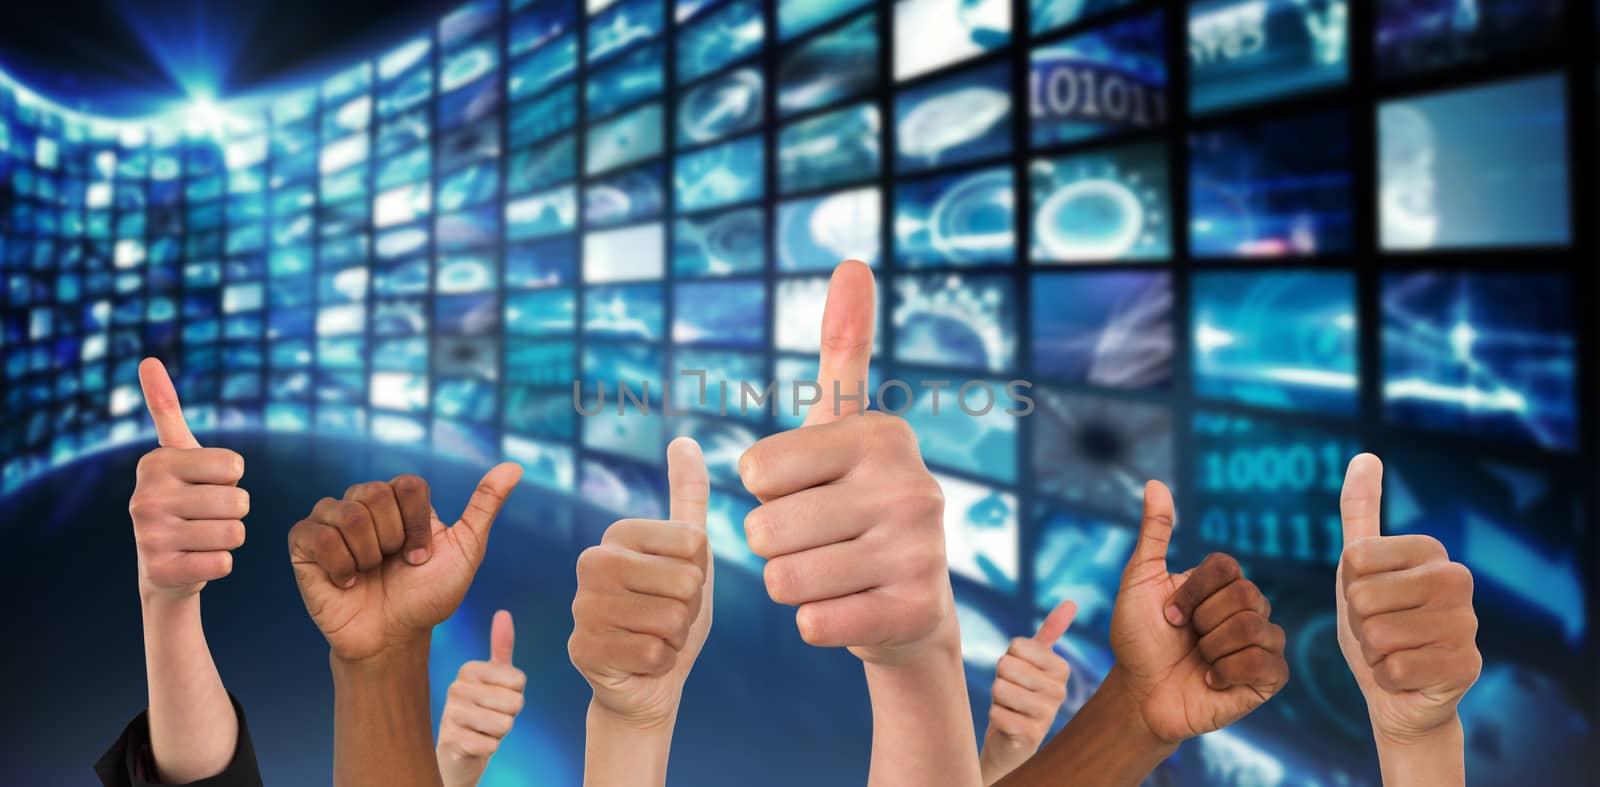 Hands showing thumbs up against curve of digital screens in blue